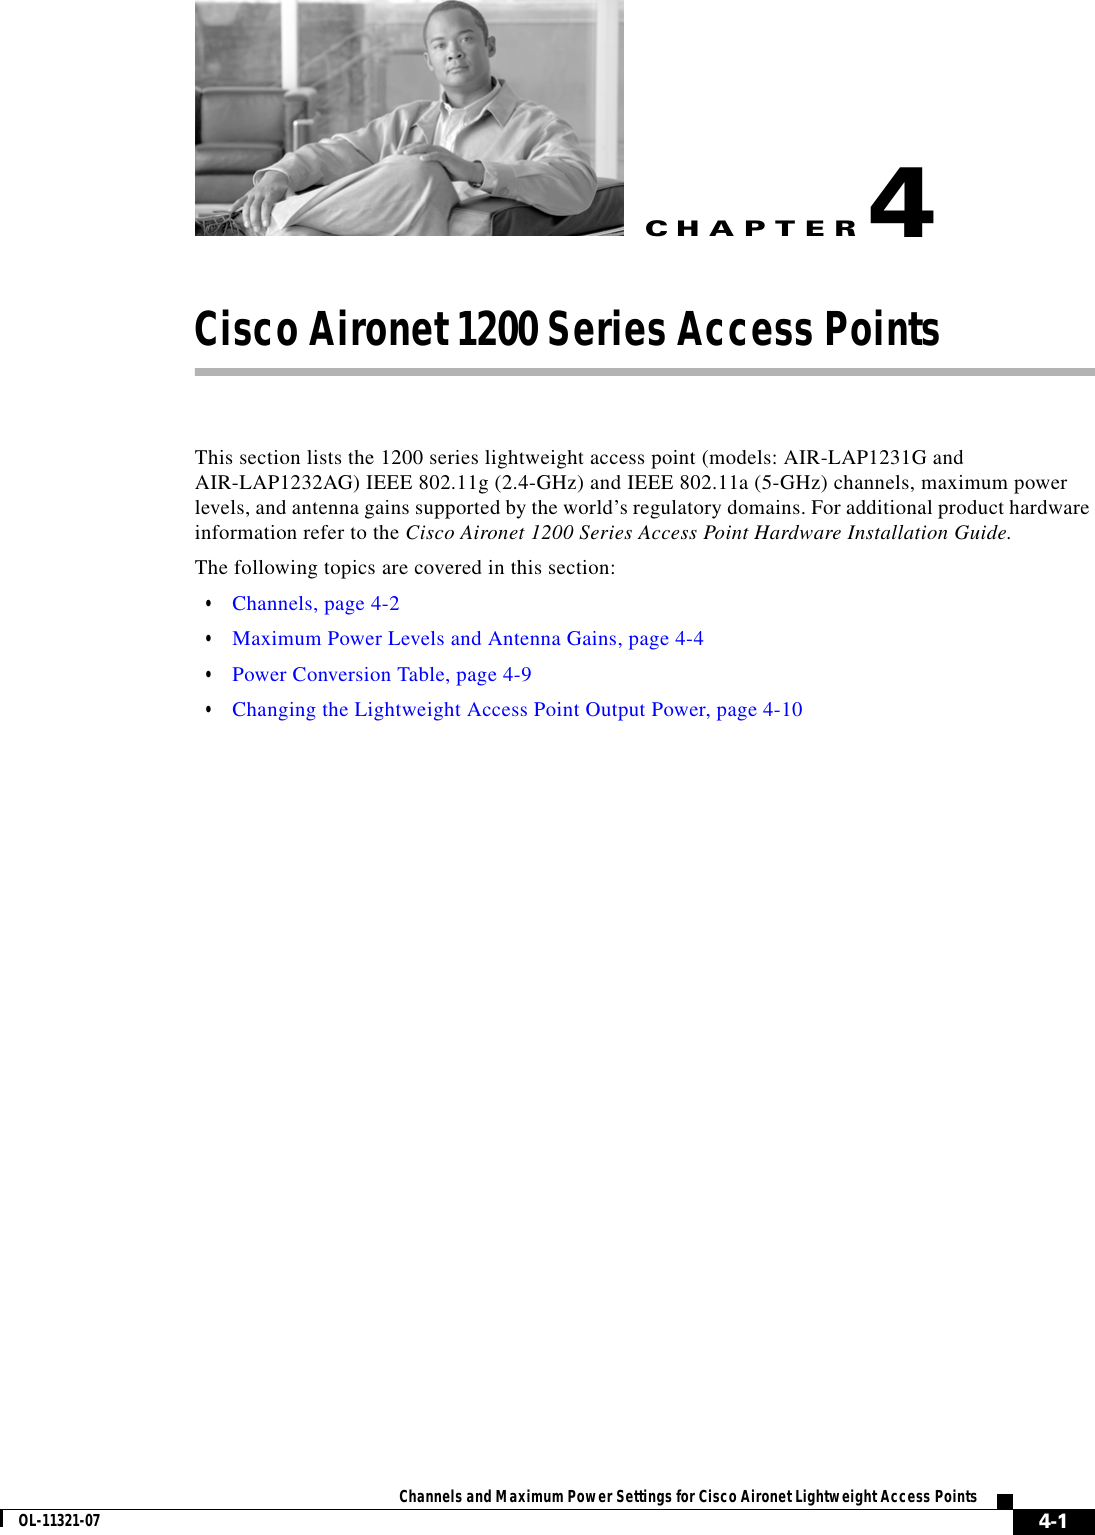 CHAPTER 4-1Channels and Maximum Power Settings for Cisco Aironet Lightweight Access PointsOL-11321-074Cisco Aironet 1200 Series Access Points This section lists the 1200 series lightweight access point (models: AIR-LAP1231G and AIR-LAP1232AG) IEEE 802.11g (2.4-GHz) and IEEE 802.11a (5-GHz) channels, maximum power levels, and antenna gains supported by the world’s regulatory domains. For additional product hardware information refer to the Cisco Aironet 1200 Series Access Point Hardware Installation Guide.The following topics are covered in this section:  • Channels, page 4-2  • Maximum Power Levels and Antenna Gains, page 4-4  • Power Conversion Table, page 4-9  • Changing the Lightweight Access Point Output Power, page 4-10